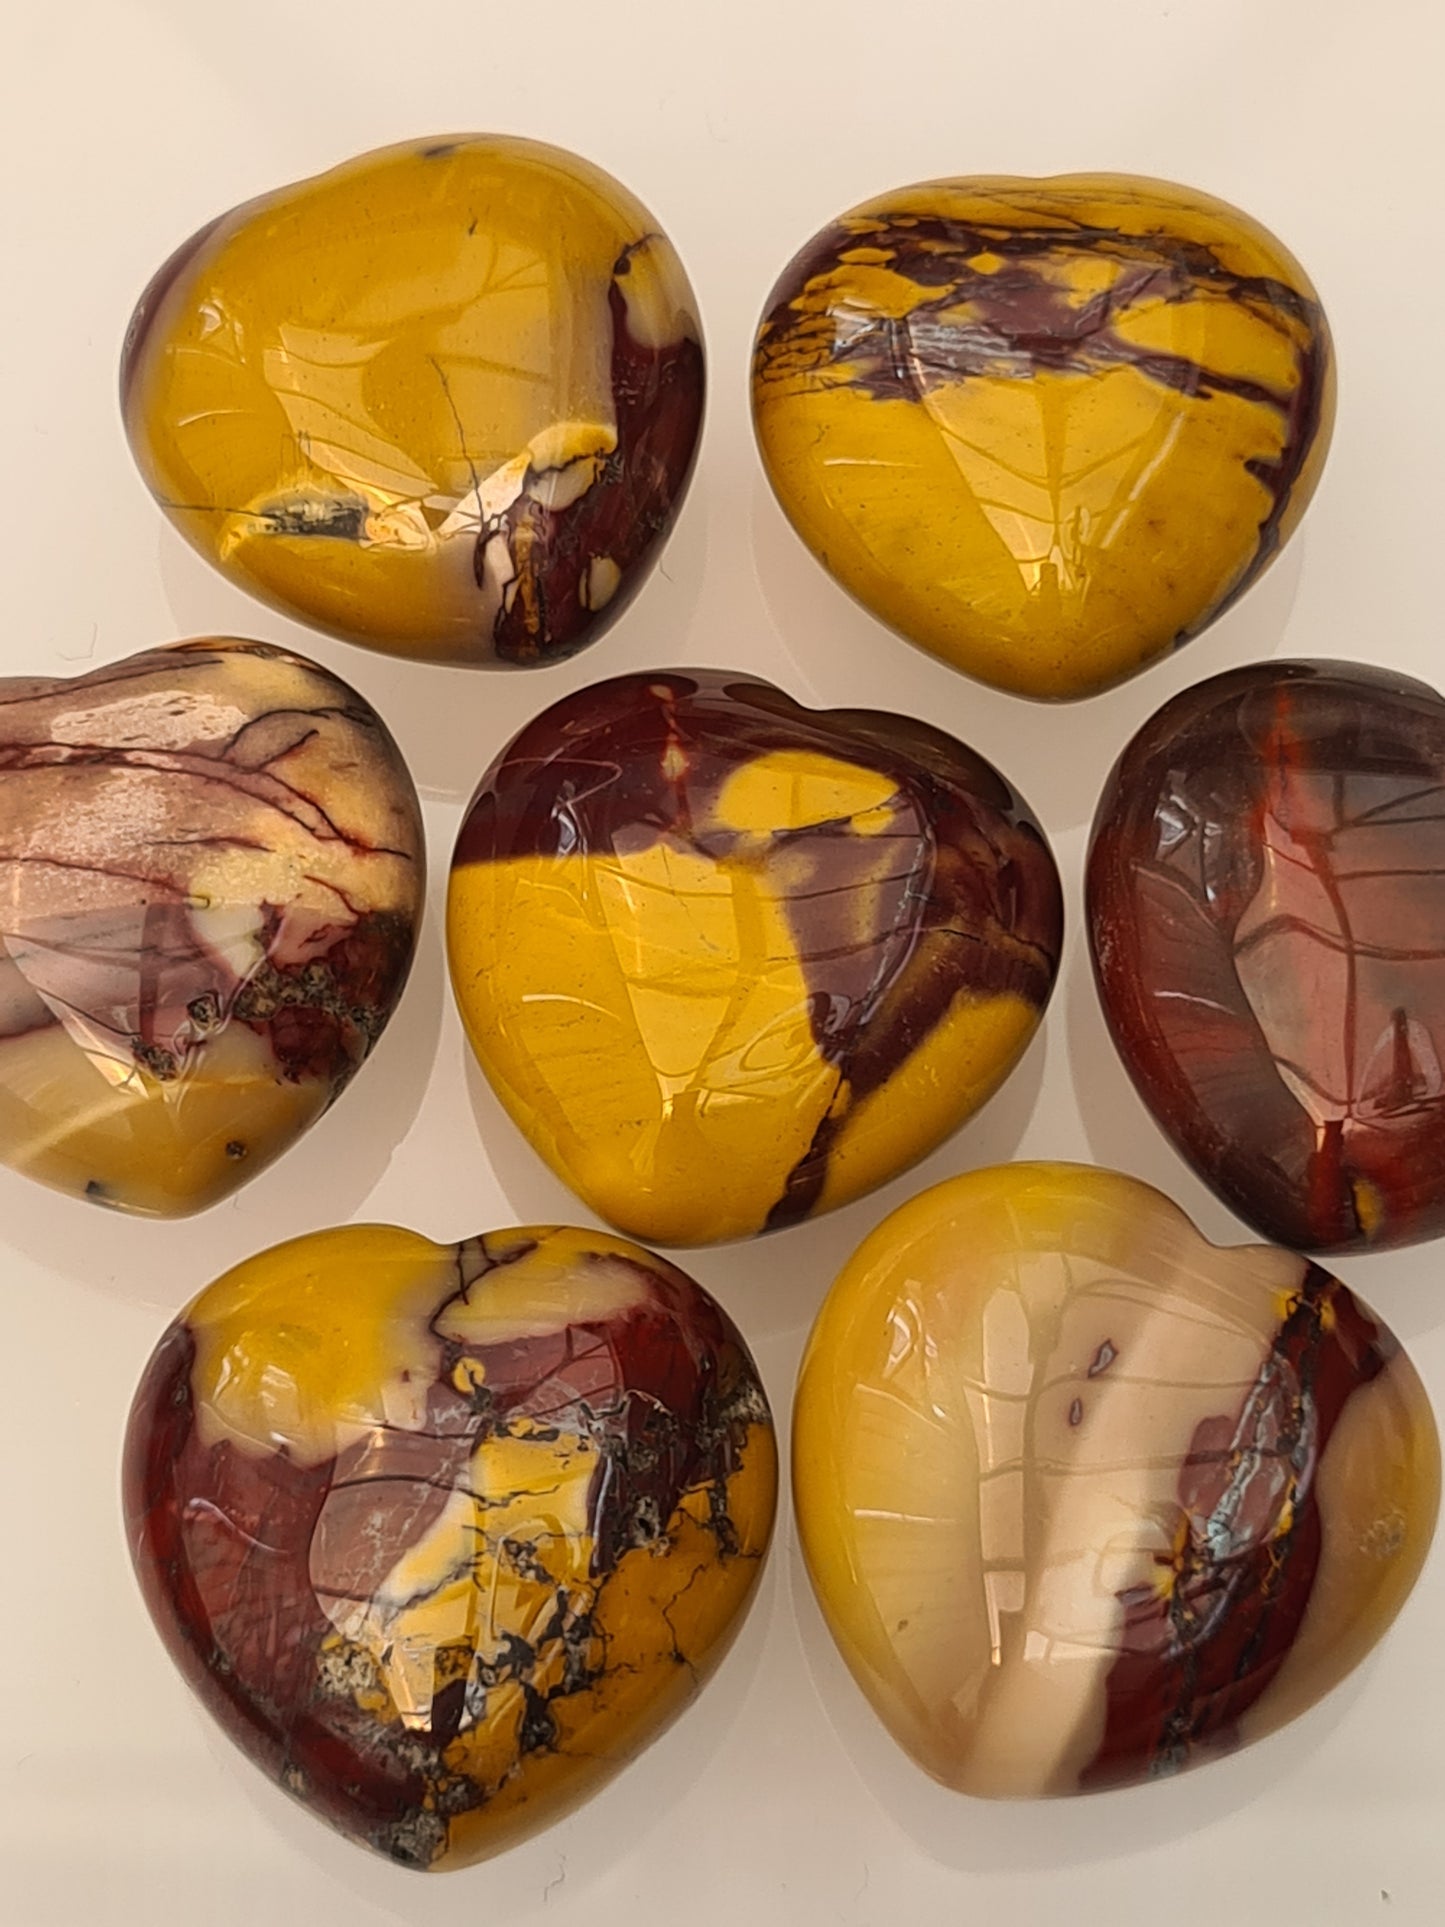 3cm Mookaite polished hearts, colours of yellow, red and pink. 7 shown on a white background.